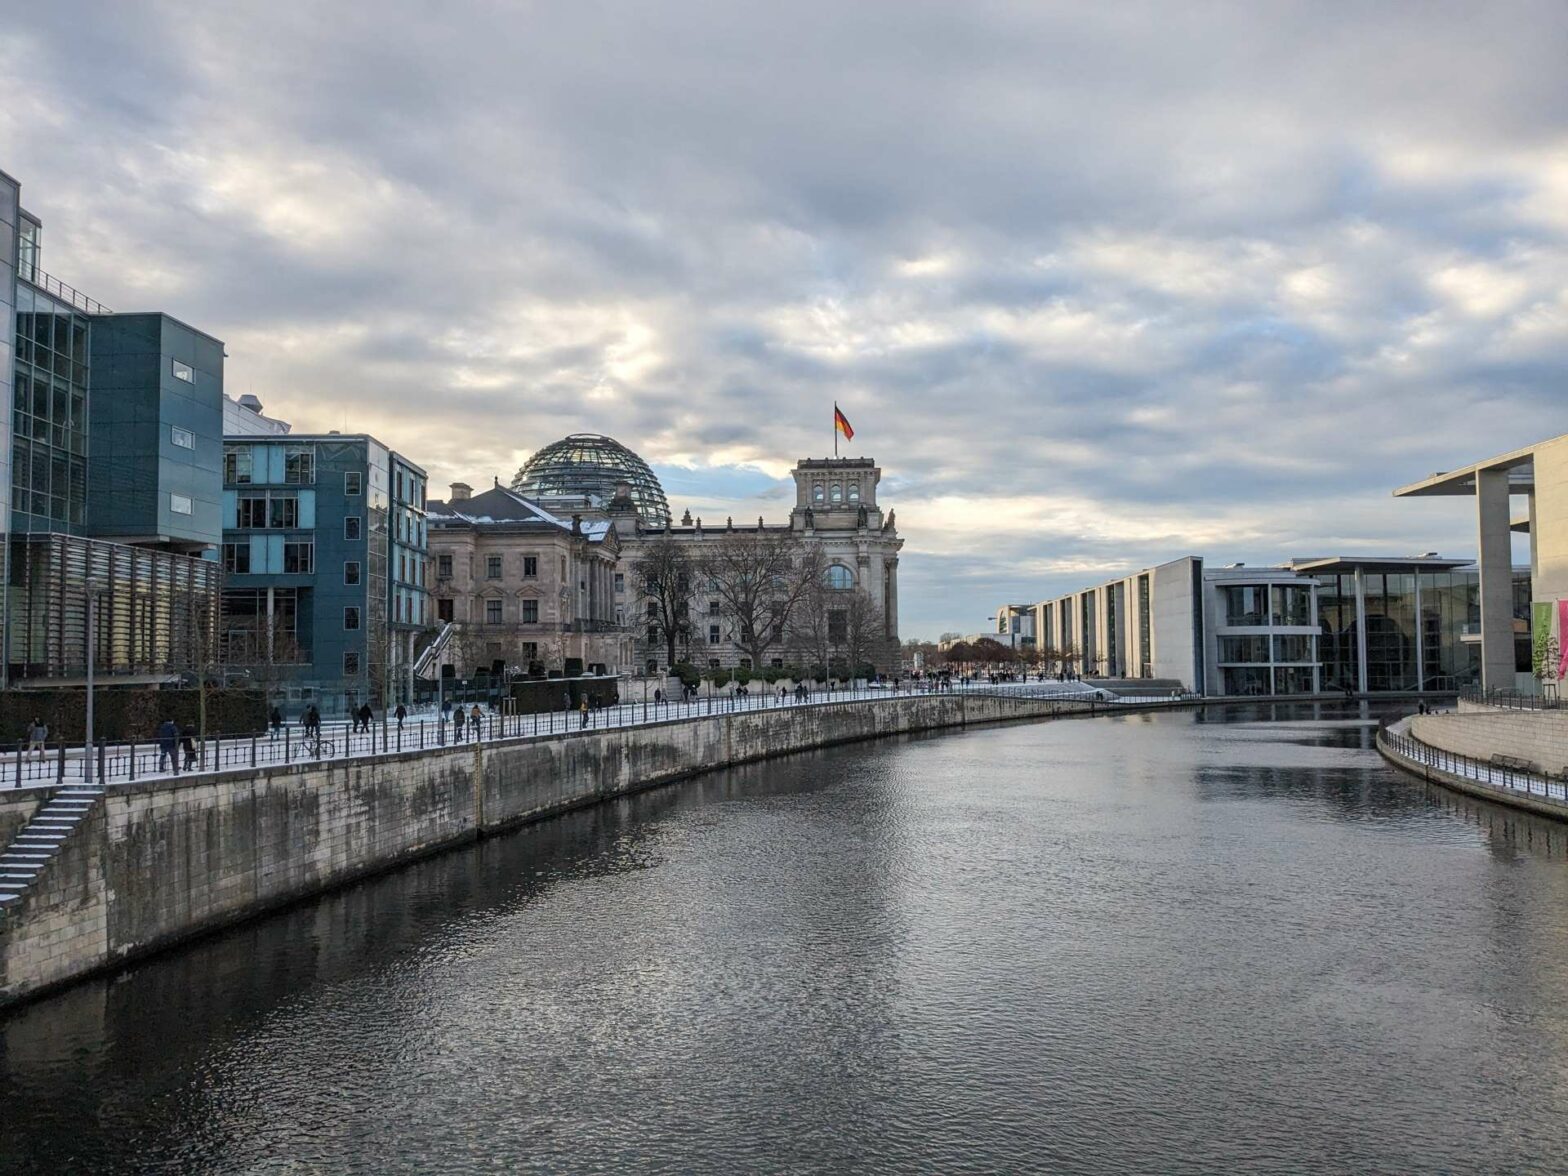 Walking across a bridge with views of the Reichstag building in Berlin